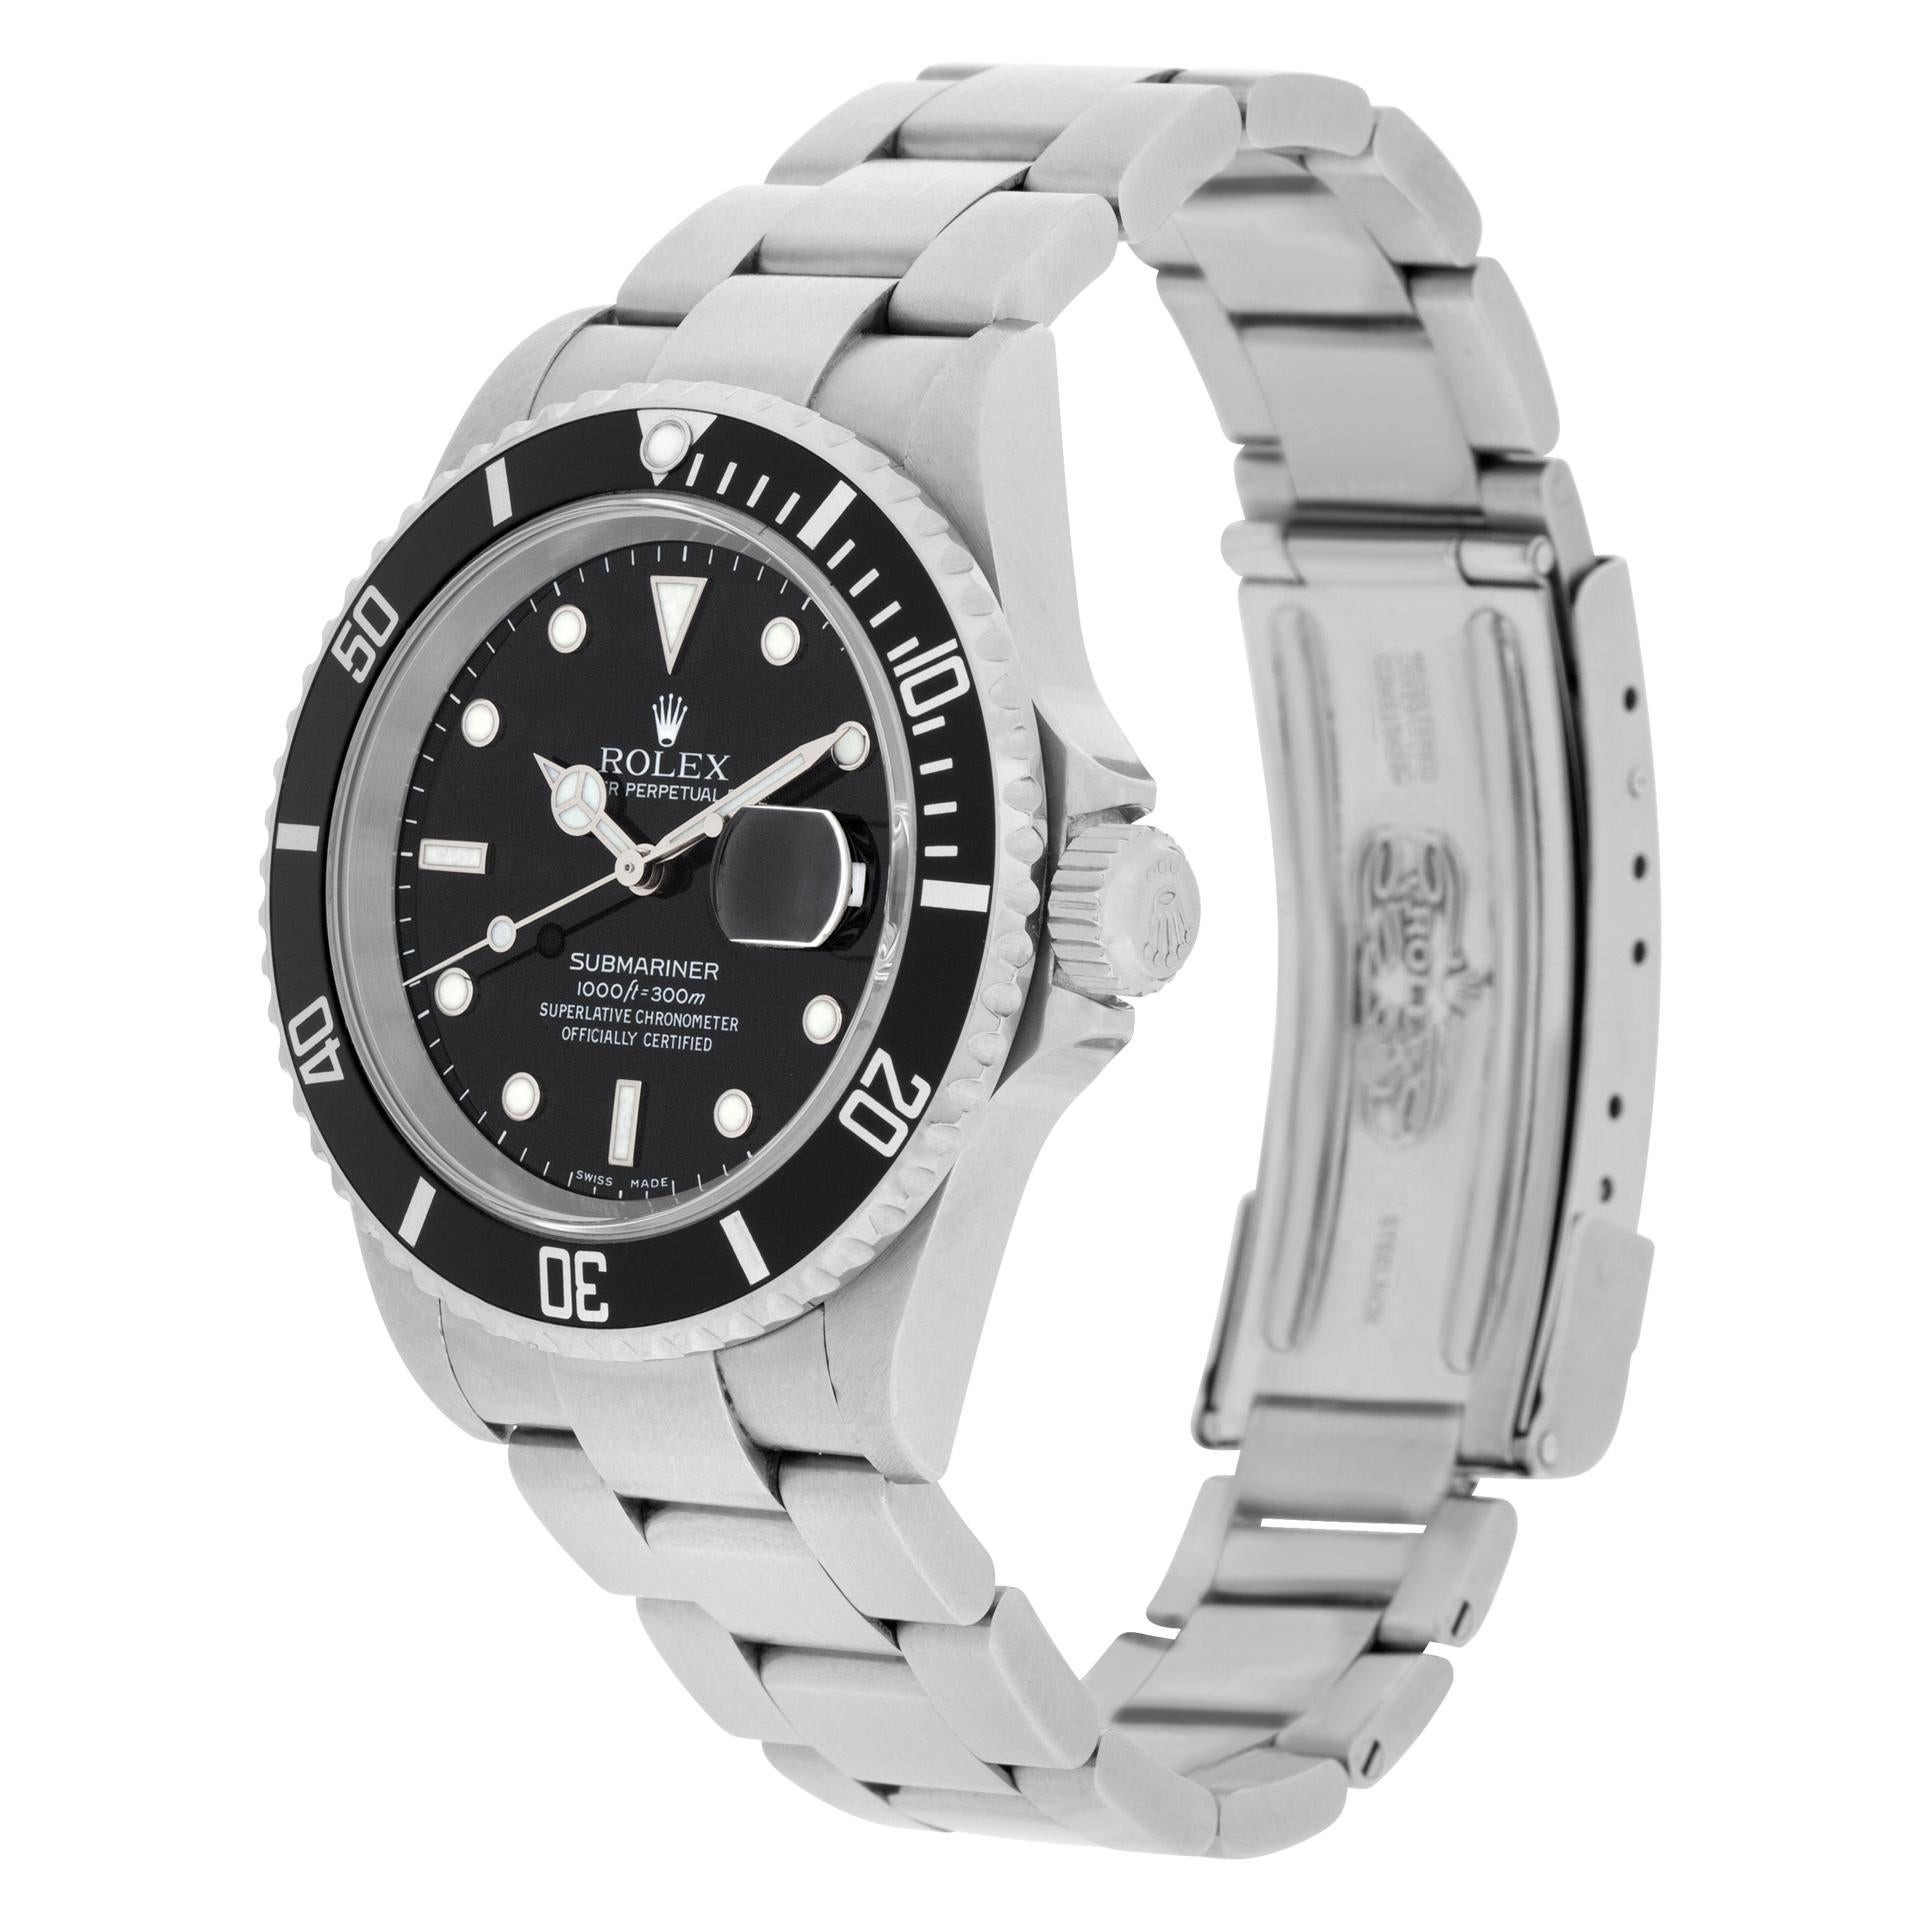 Rolex Submariner in stainless steel. Auto w/ sweep seconds and date. 40 mm case size. Circa 2002. Ref 16610T. **Bank wire only at this price** Fine Pre-owned Rolex Watch.

Certified preowned Sport Rolex Submariner 16610T watch is made out of